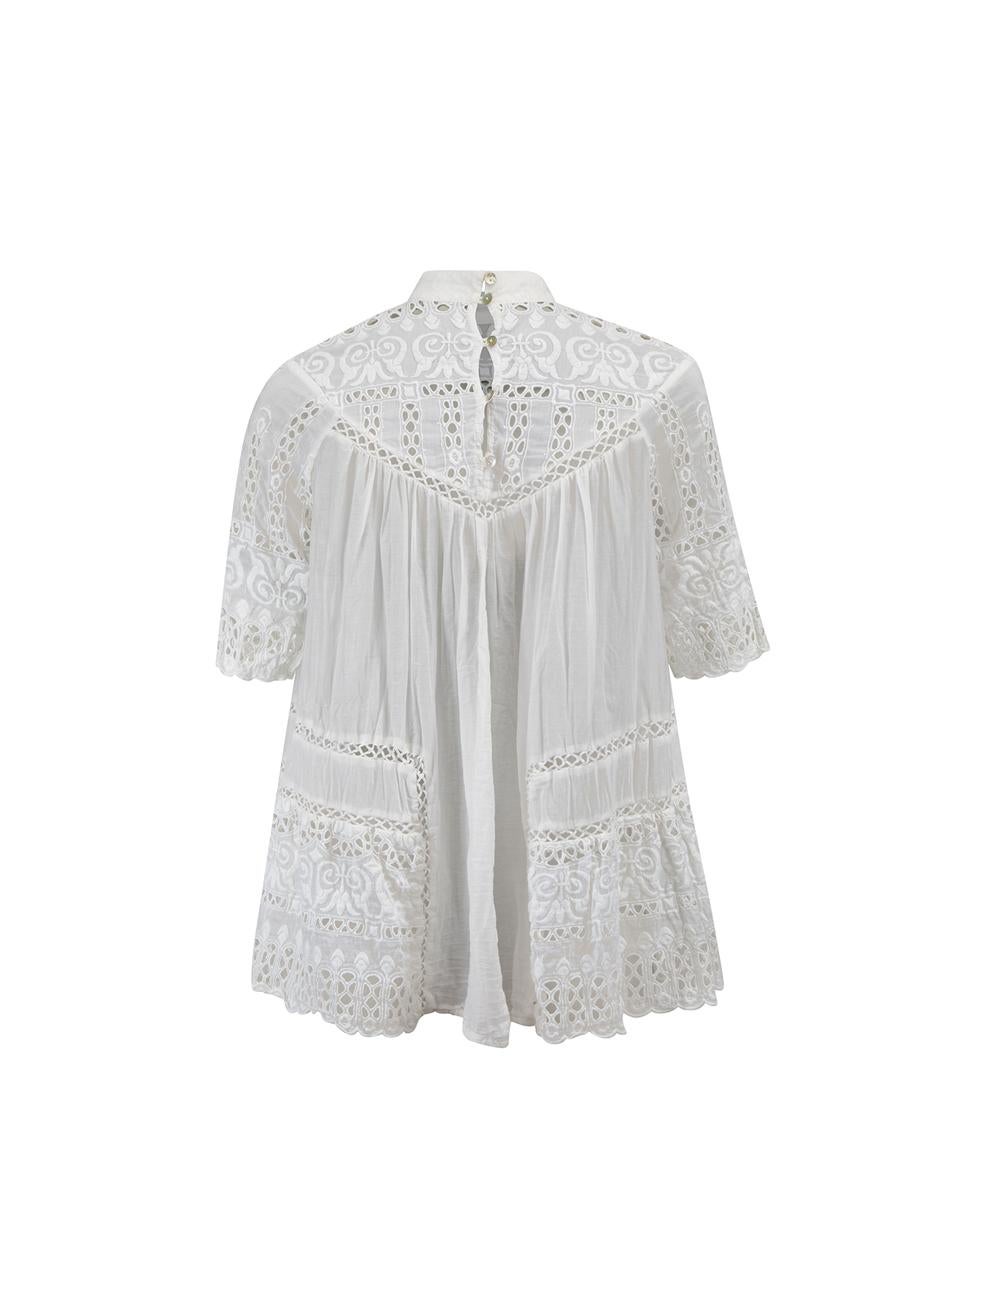 Zimmermann White Cotton Broderie Anglaise Lace Cut-Out Smock Top Size M In Excellent Condition For Sale In London, GB